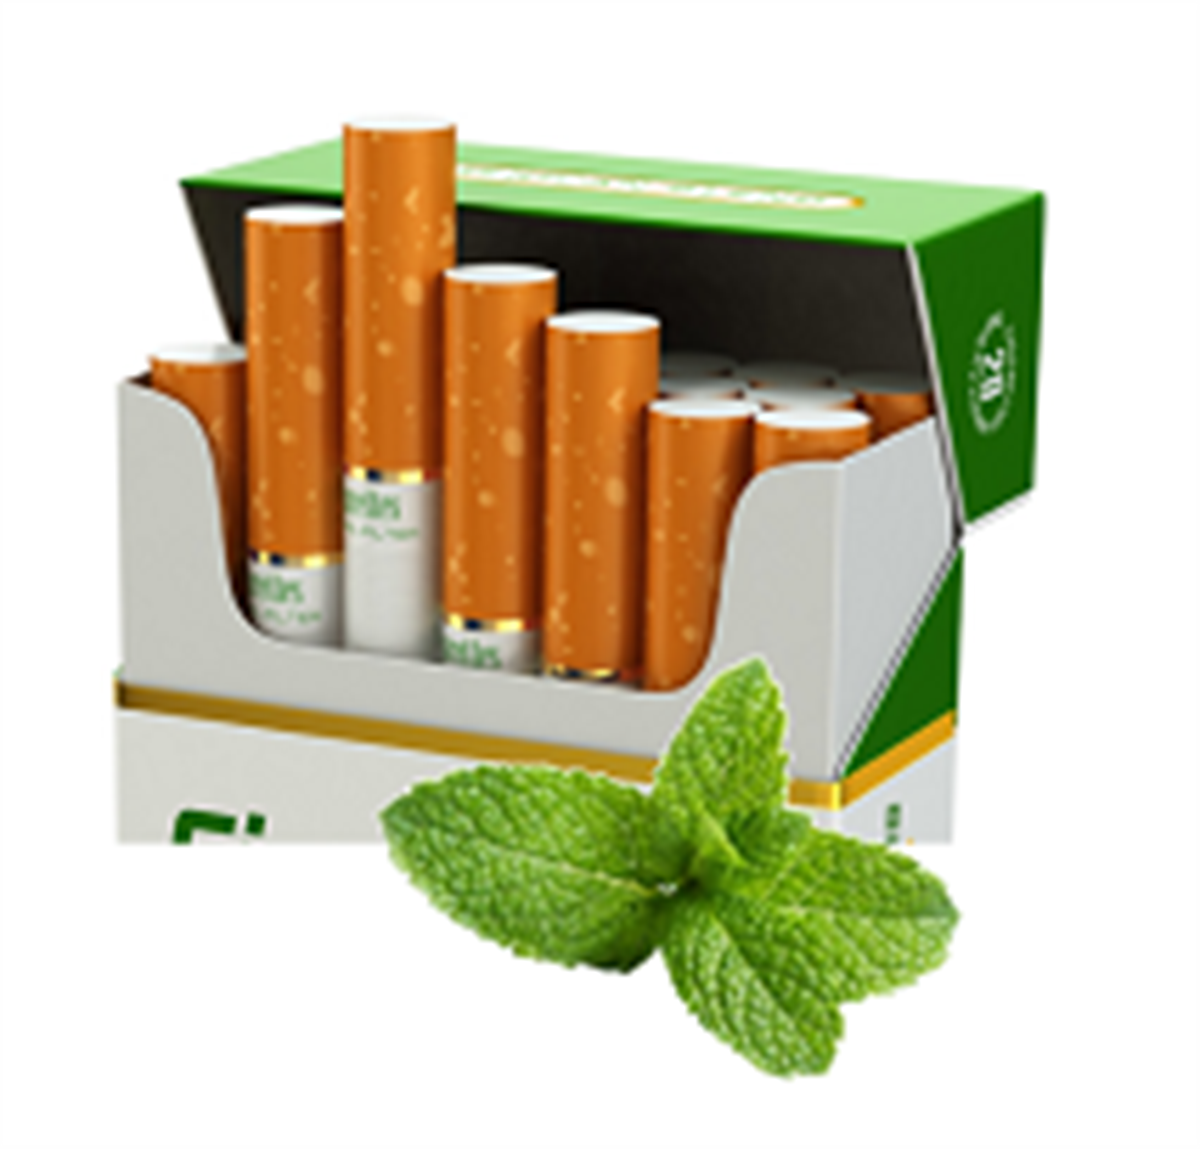 Flavored/Menthol Tobacco Products Ban